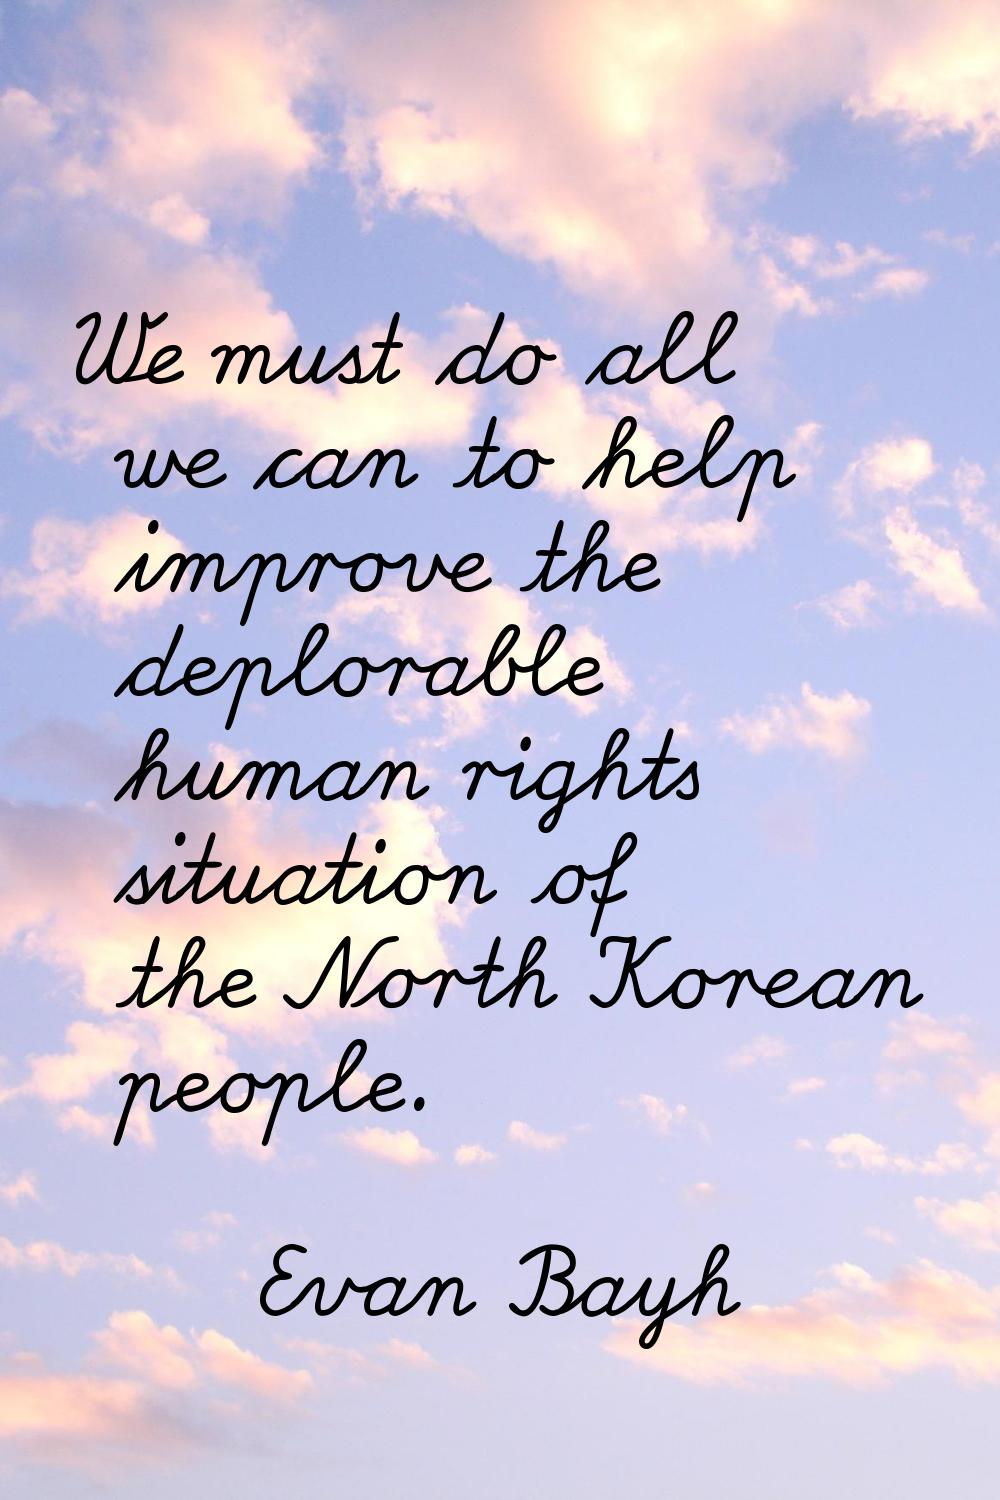 We must do all we can to help improve the deplorable human rights situation of the North Korean peo